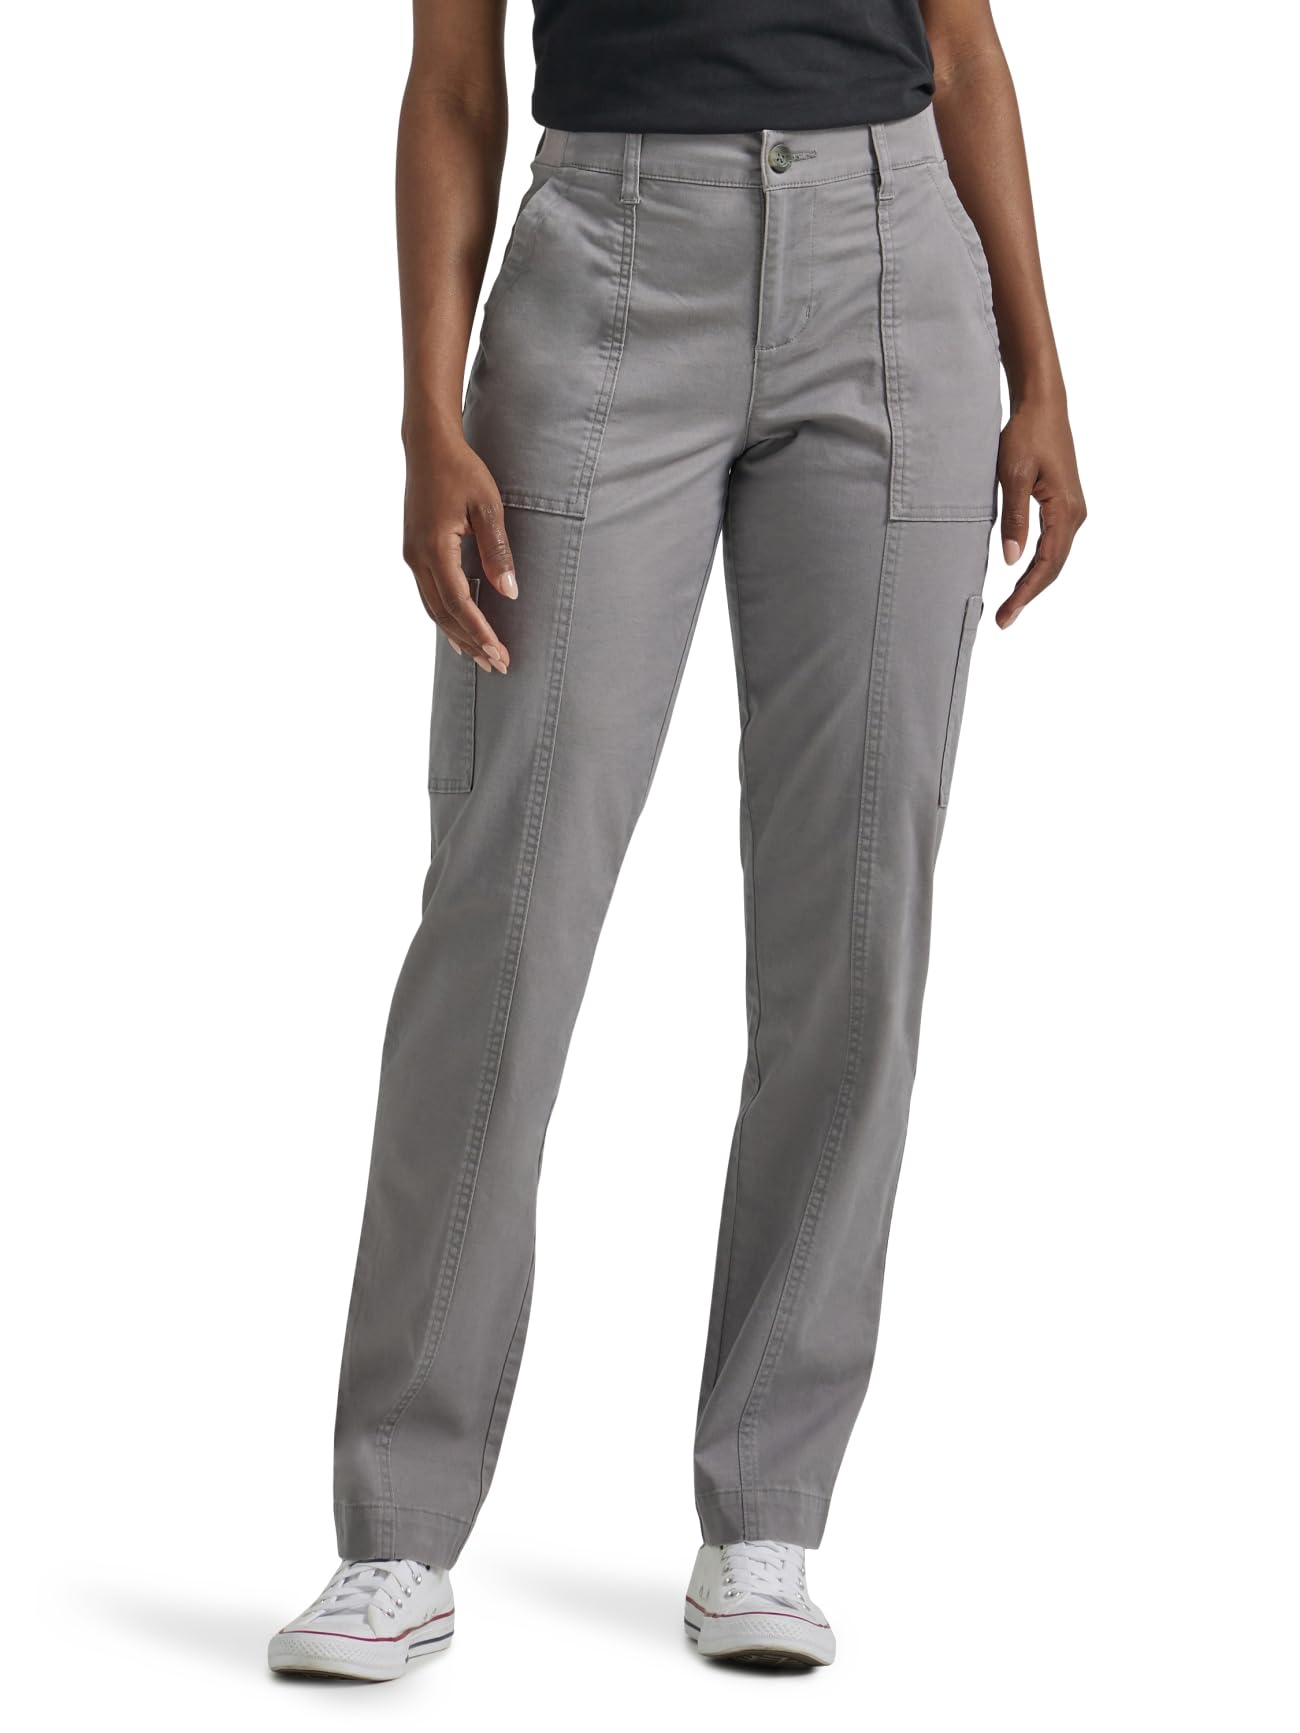 Lee Women's Ultra Lux Comfort with Flex-to-go Utility Pant